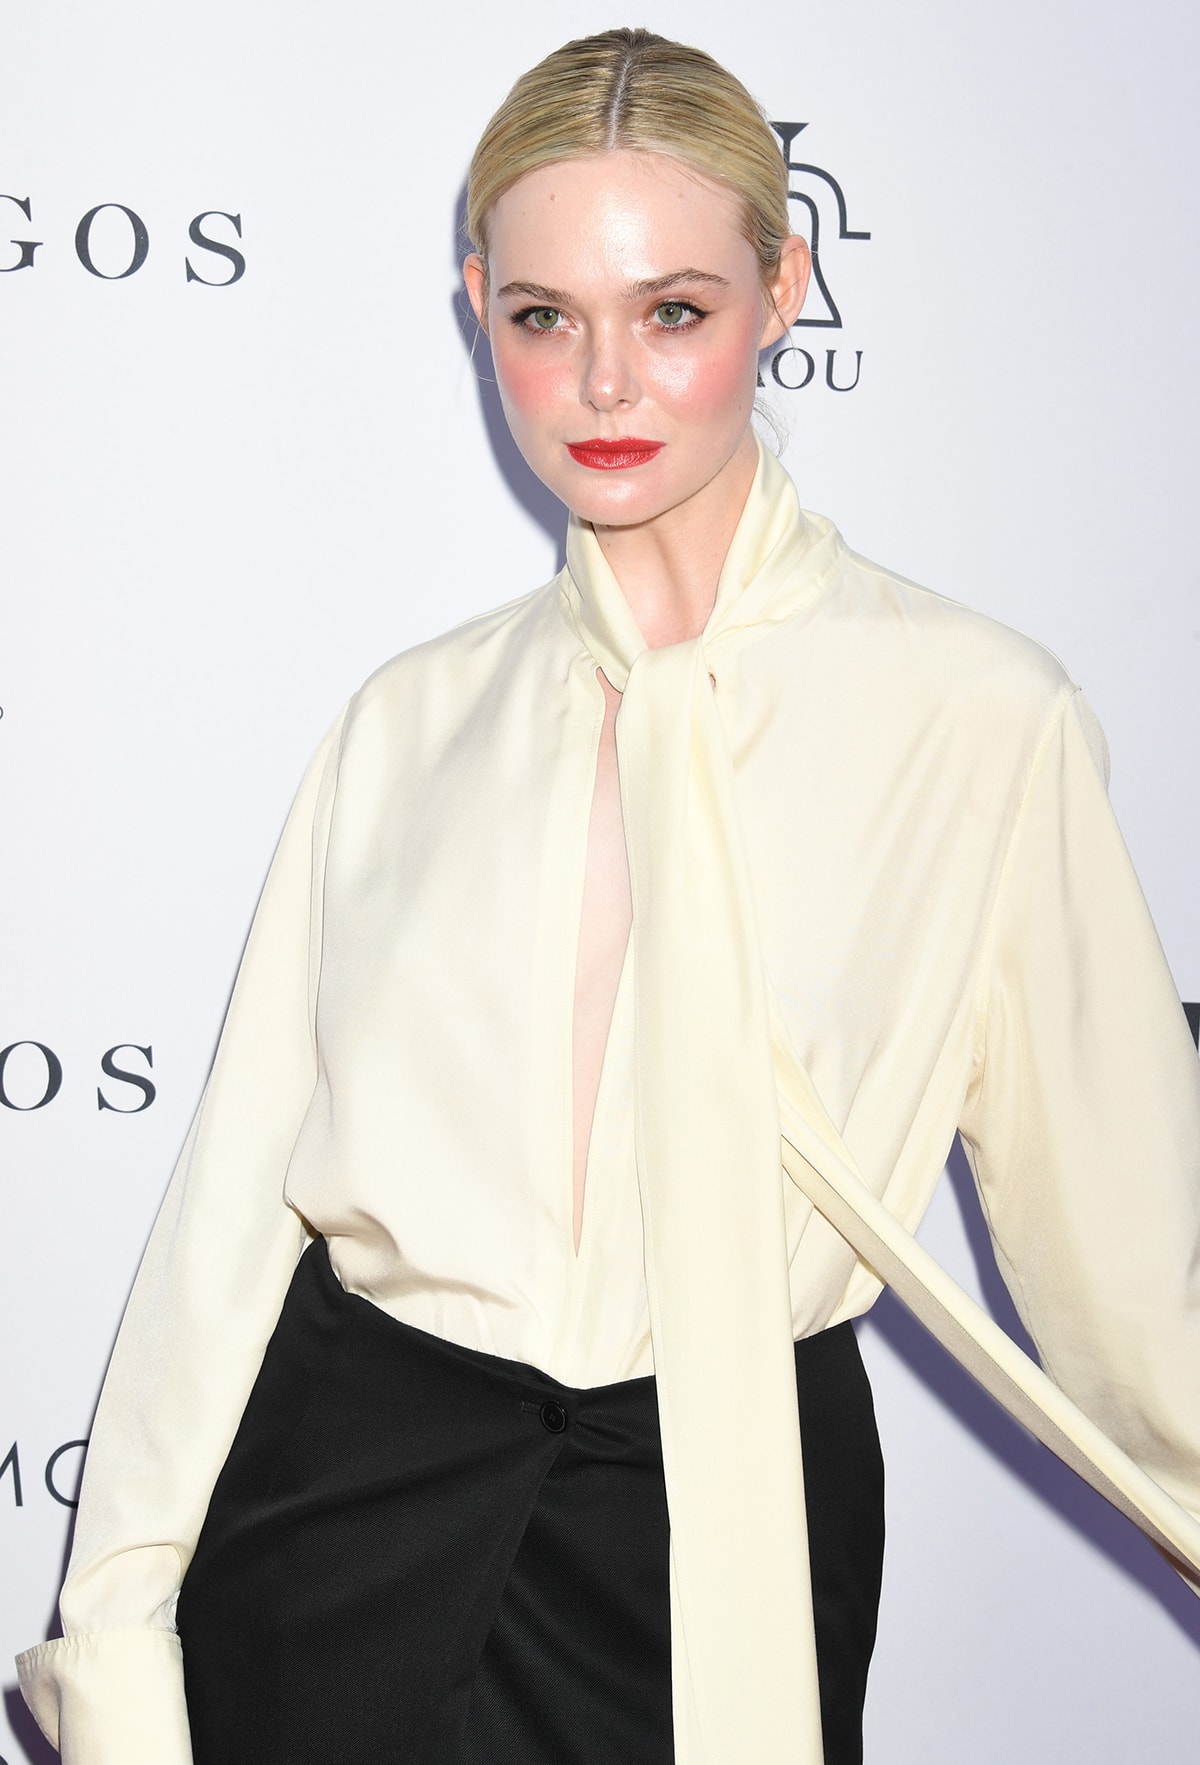 Elle Fanning accentuates her blue eyes with cat-eye makeup and wears her platinum blonde hair in a neat updo